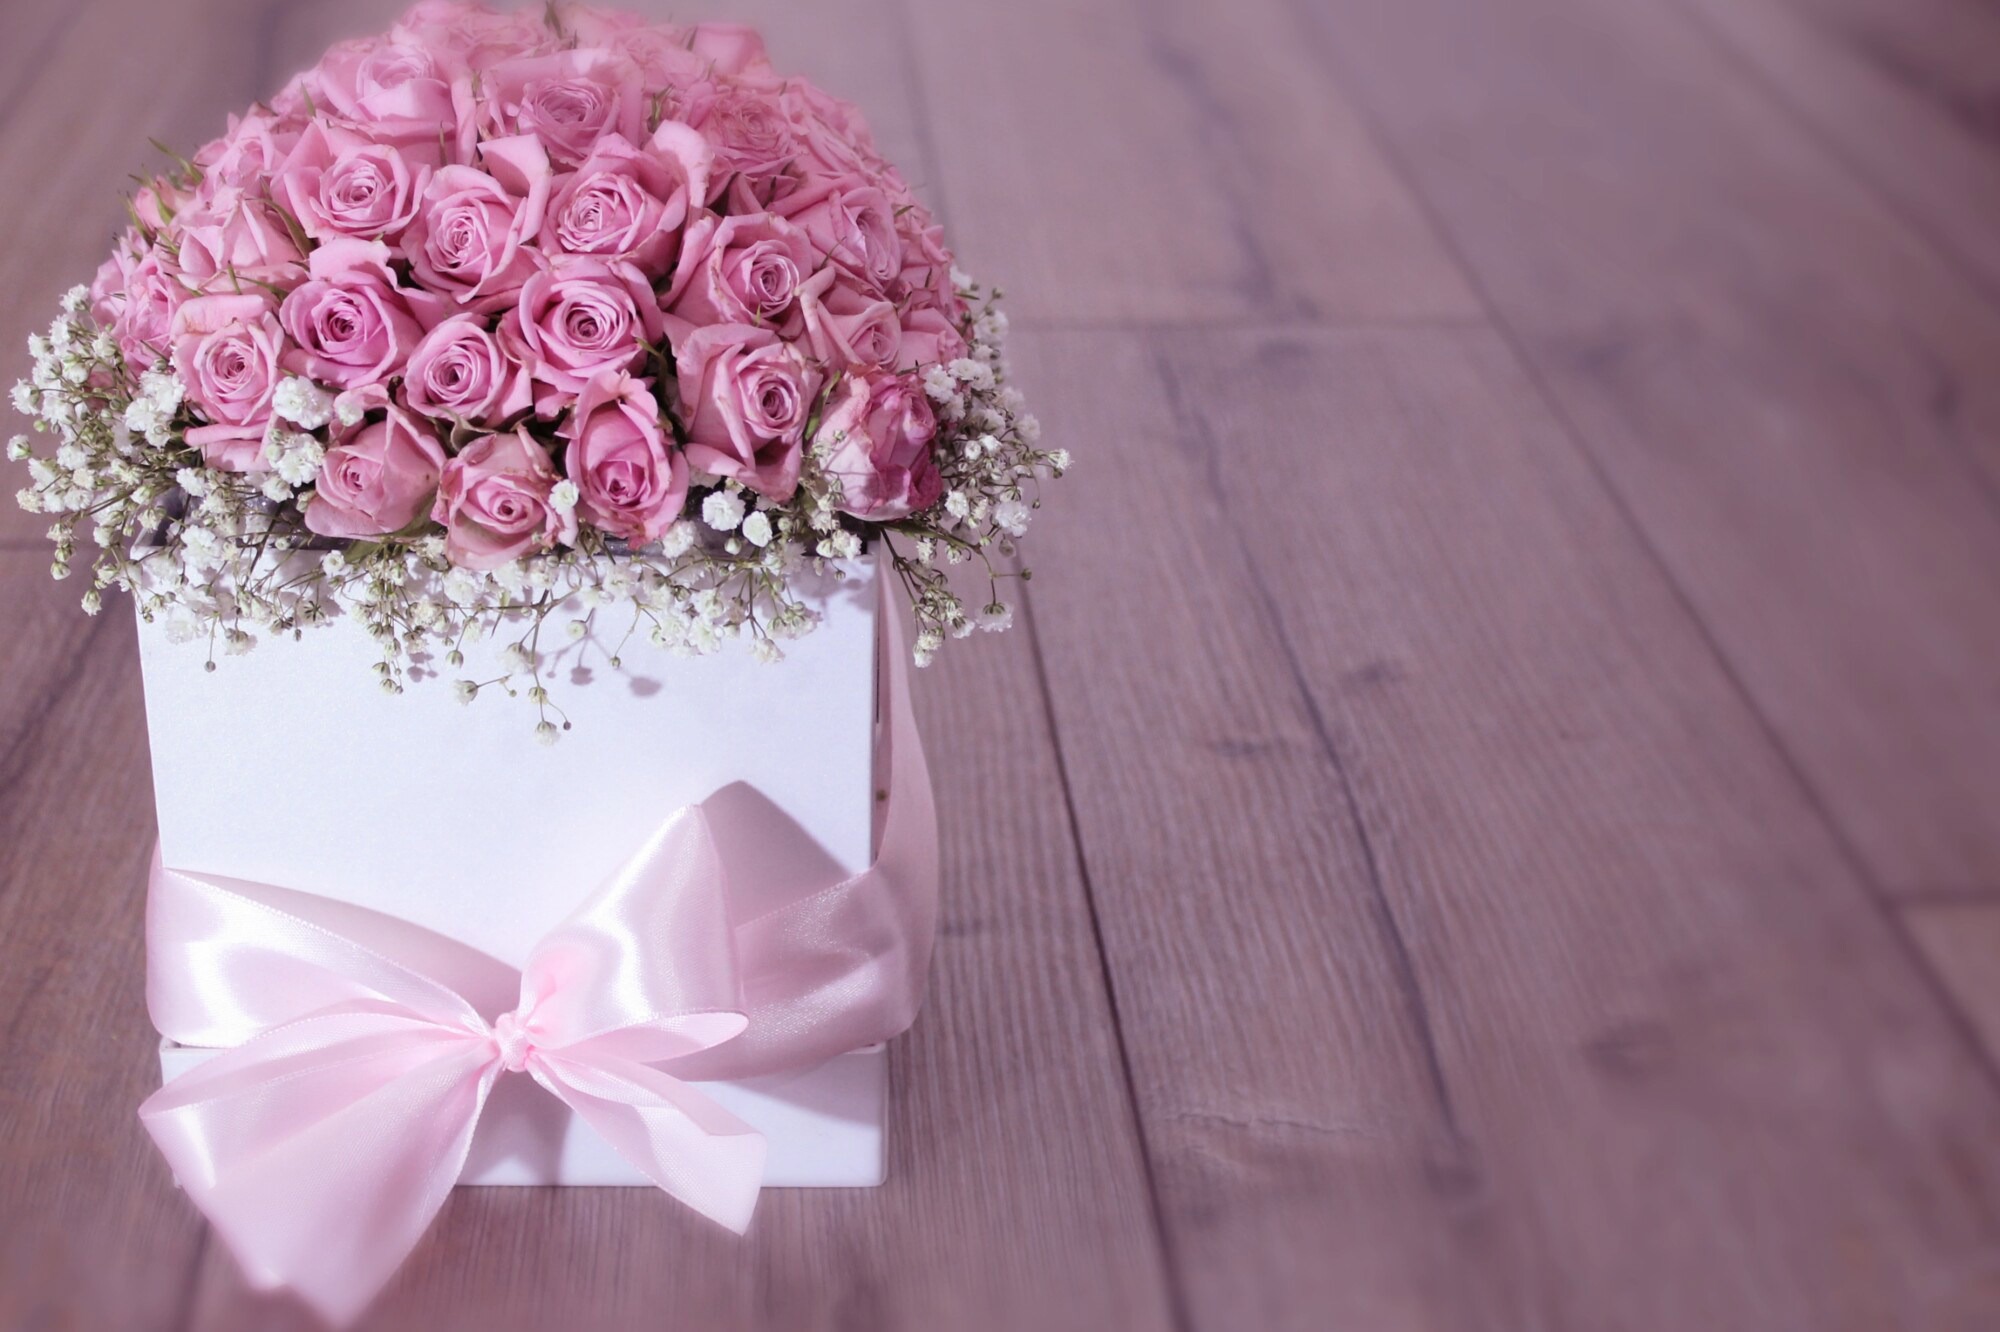 DIY Pink Rose Bouquet: Step-by-Step Guide to Creating a Beautiful ...